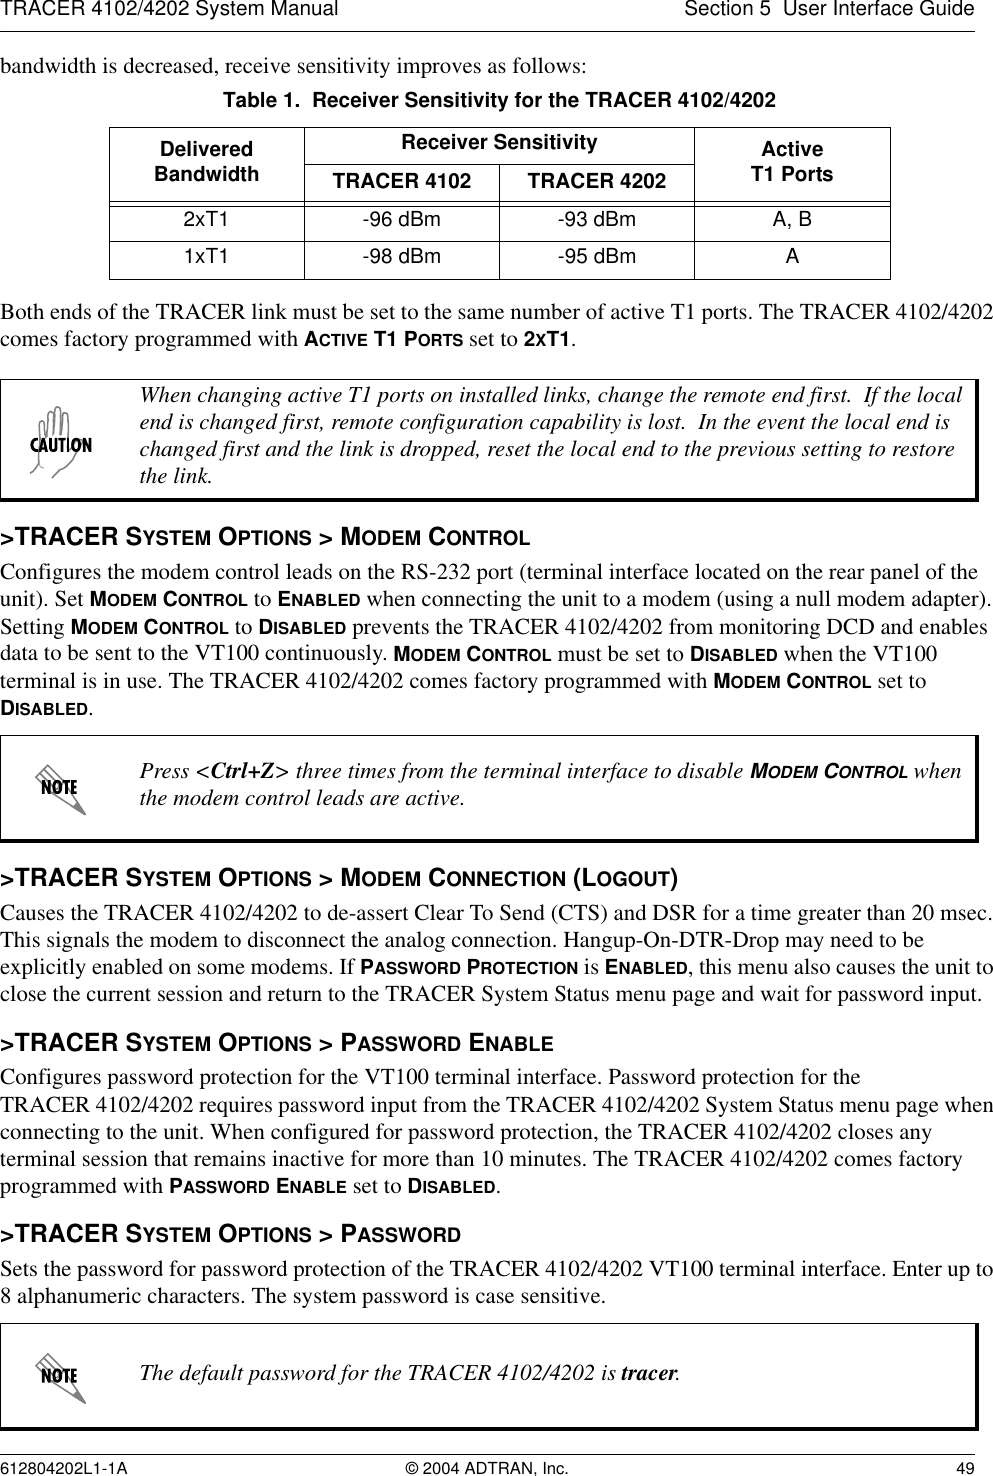 TRACER 4102/4202 System Manual Section 5  User Interface Guide612804202L1-1A © 2004 ADTRAN, Inc. 49bandwidth is decreased, receive sensitivity improves as follows:Both ends of the TRACER link must be set to the same number of active T1 ports. The TRACER 4102/4202 comes factory programmed with ACTIVE T1 PORTS set to 2XT1.&gt;TRACER SYSTEM OPTIONS &gt; MODEM CONTROLConfigures the modem control leads on the RS-232 port (terminal interface located on the rear panel of the unit). Set MODEM CONTROL to ENABLED when connecting the unit to a modem (using a null modem adapter). Setting MODEM CONTROL to DISABLED prevents the TRACER 4102/4202 from monitoring DCD and enables data to be sent to the VT100 continuously. MODEM CONTROL must be set to DISABLED when the VT100 terminal is in use. The TRACER 4102/4202 comes factory programmed with MODEM CONTROL set to DISABLED.&gt;TRACER SYSTEM OPTIONS &gt; MODEM CONNECTION (LOGOUT)Causes the TRACER 4102/4202 to de-assert Clear To Send (CTS) and DSR for a time greater than 20 msec. This signals the modem to disconnect the analog connection. Hangup-On-DTR-Drop may need to be explicitly enabled on some modems. If PASSWORD PROTECTION is ENABLED, this menu also causes the unit to close the current session and return to the TRACER System Status menu page and wait for password input.&gt;TRACER SYSTEM OPTIONS &gt; PASSWORD ENABLEConfigures password protection for the VT100 terminal interface. Password protection for the TRACER 4102/4202 requires password input from the TRACER 4102/4202 System Status menu page when connecting to the unit. When configured for password protection, the TRACER 4102/4202 closes any terminal session that remains inactive for more than 10 minutes. The TRACER 4102/4202 comes factory programmed with PASSWORD ENABLE set to DISABLED. &gt;TRACER SYSTEM OPTIONS &gt; PASSWORDSets the password for password protection of the TRACER 4102/4202 VT100 terminal interface. Enter up to 8 alphanumeric characters. The system password is case sensitive.Table 1.  Receiver Sensitivity for the TRACER 4102/4202Delivered BandwidthReceiver Sensitivity ActiveT1 PortsTRACER 4102 TRACER 42022xT1 -96 dBm -93 dBm A, B1xT1 -98 dBm -95 dBm AWhen changing active T1 ports on installed links, change the remote end first.  If the local end is changed first, remote configuration capability is lost.  In the event the local end is changed first and the link is dropped, reset the local end to the previous setting to restore the link.Press &lt;Ctrl+Z&gt; three times from the terminal interface to disable MODEM CONTROL when the modem control leads are active.The default password for the TRACER 4102/4202 is tracer.